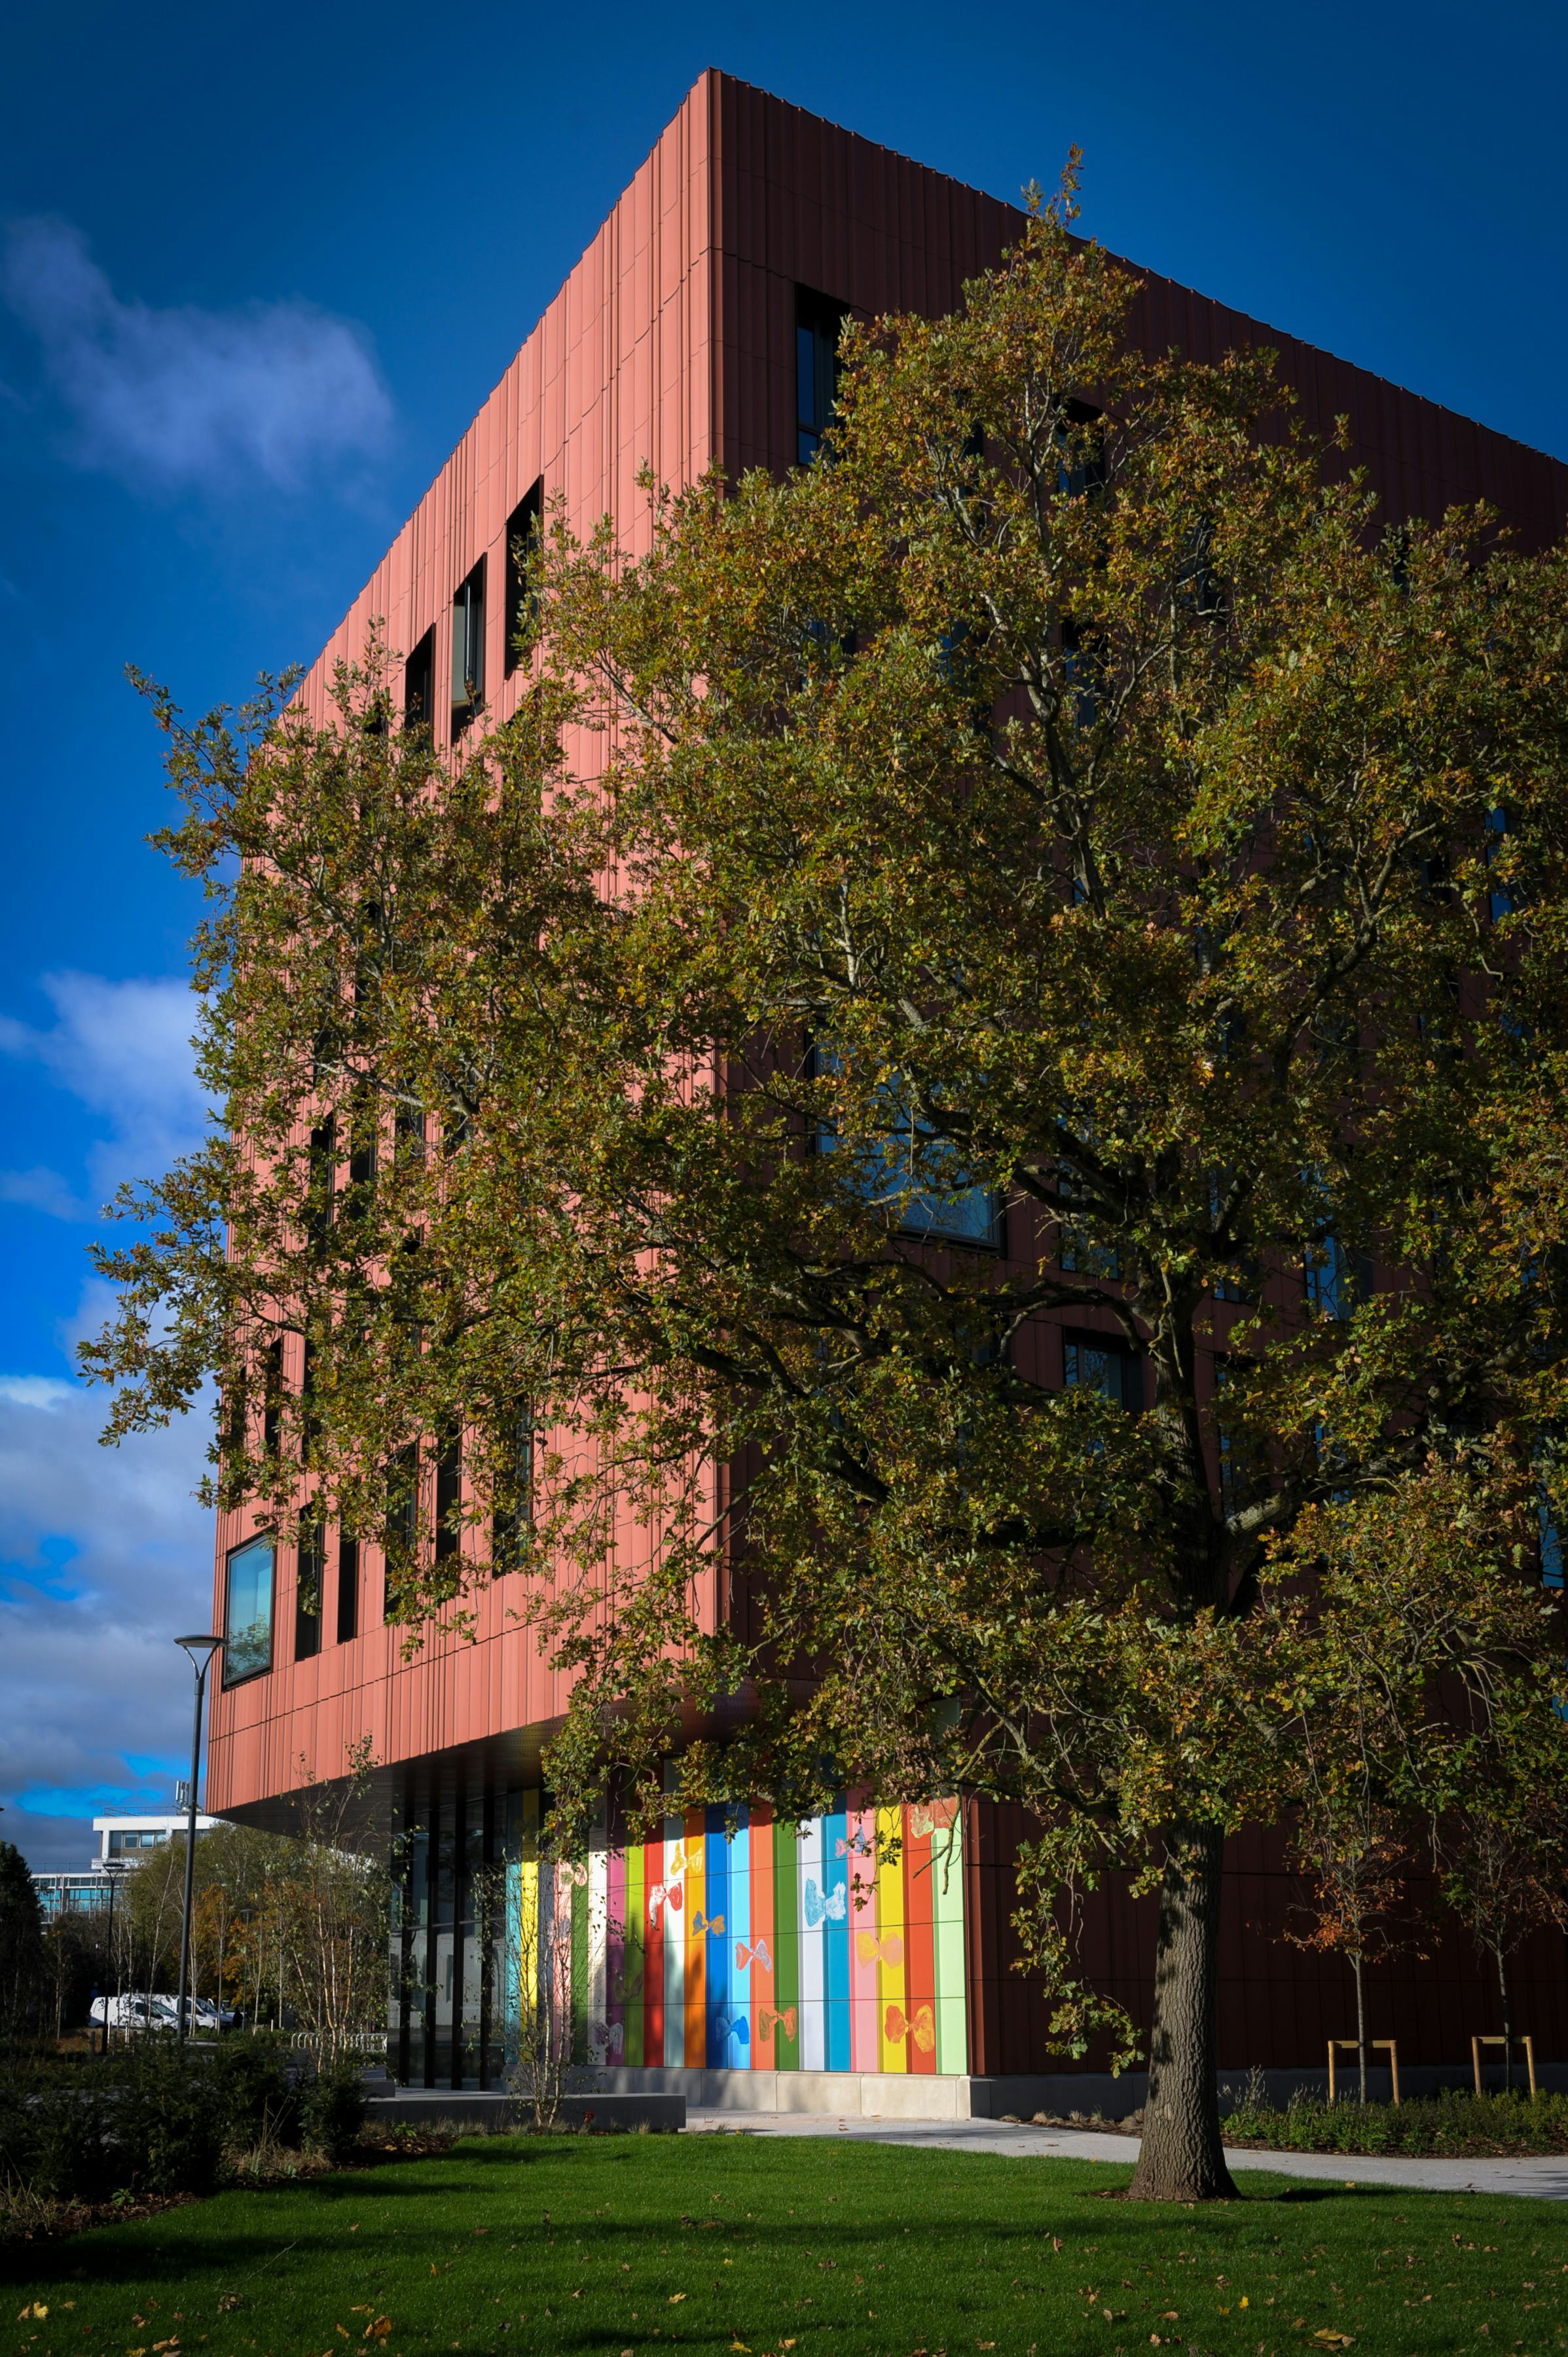 An artwork of large, colourful tiles on a new building at the University of Warwick